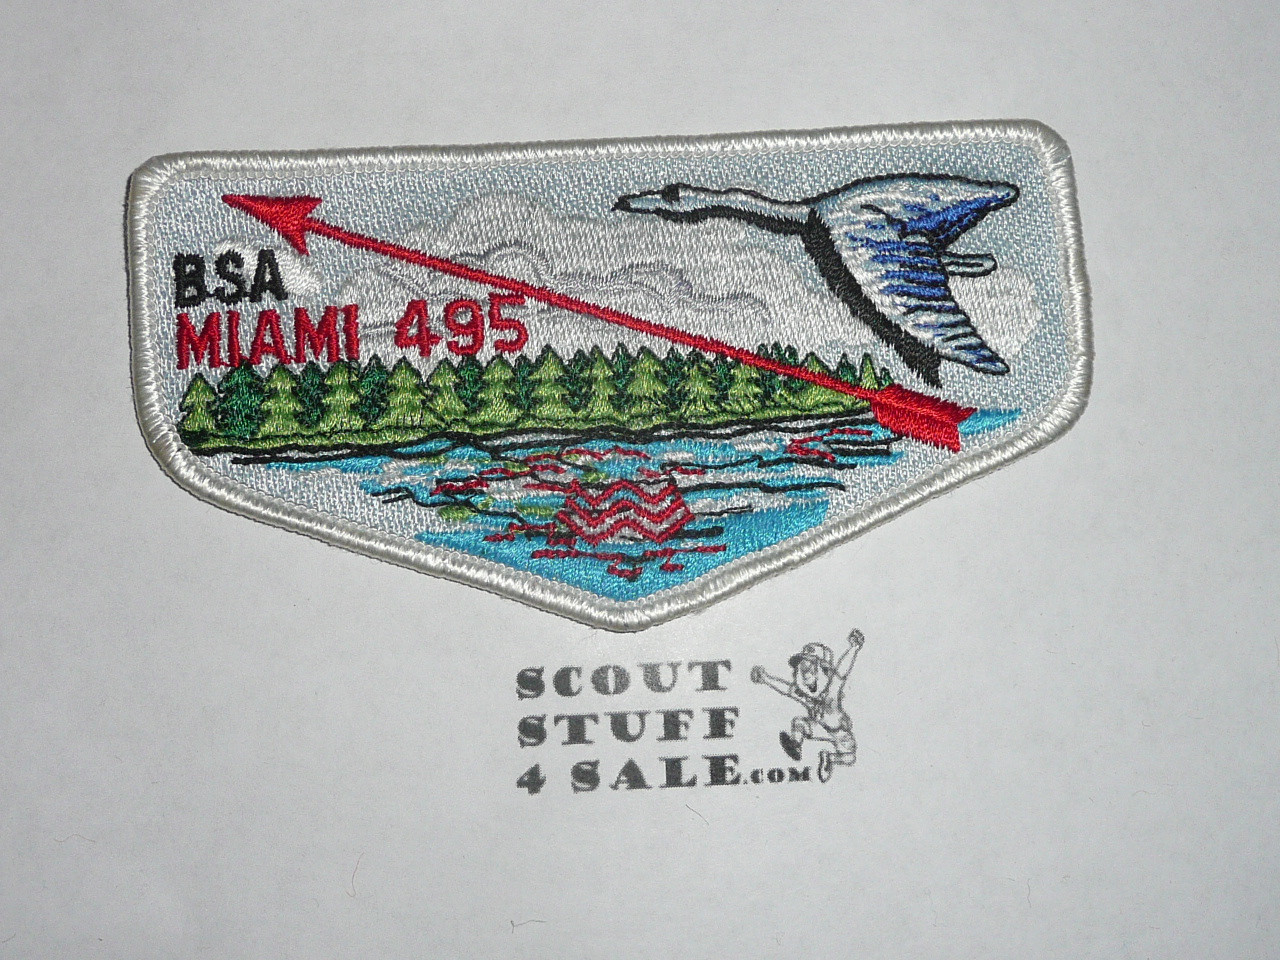 Order of the Arrow Lodge #495 Miami s7 Flap Patch